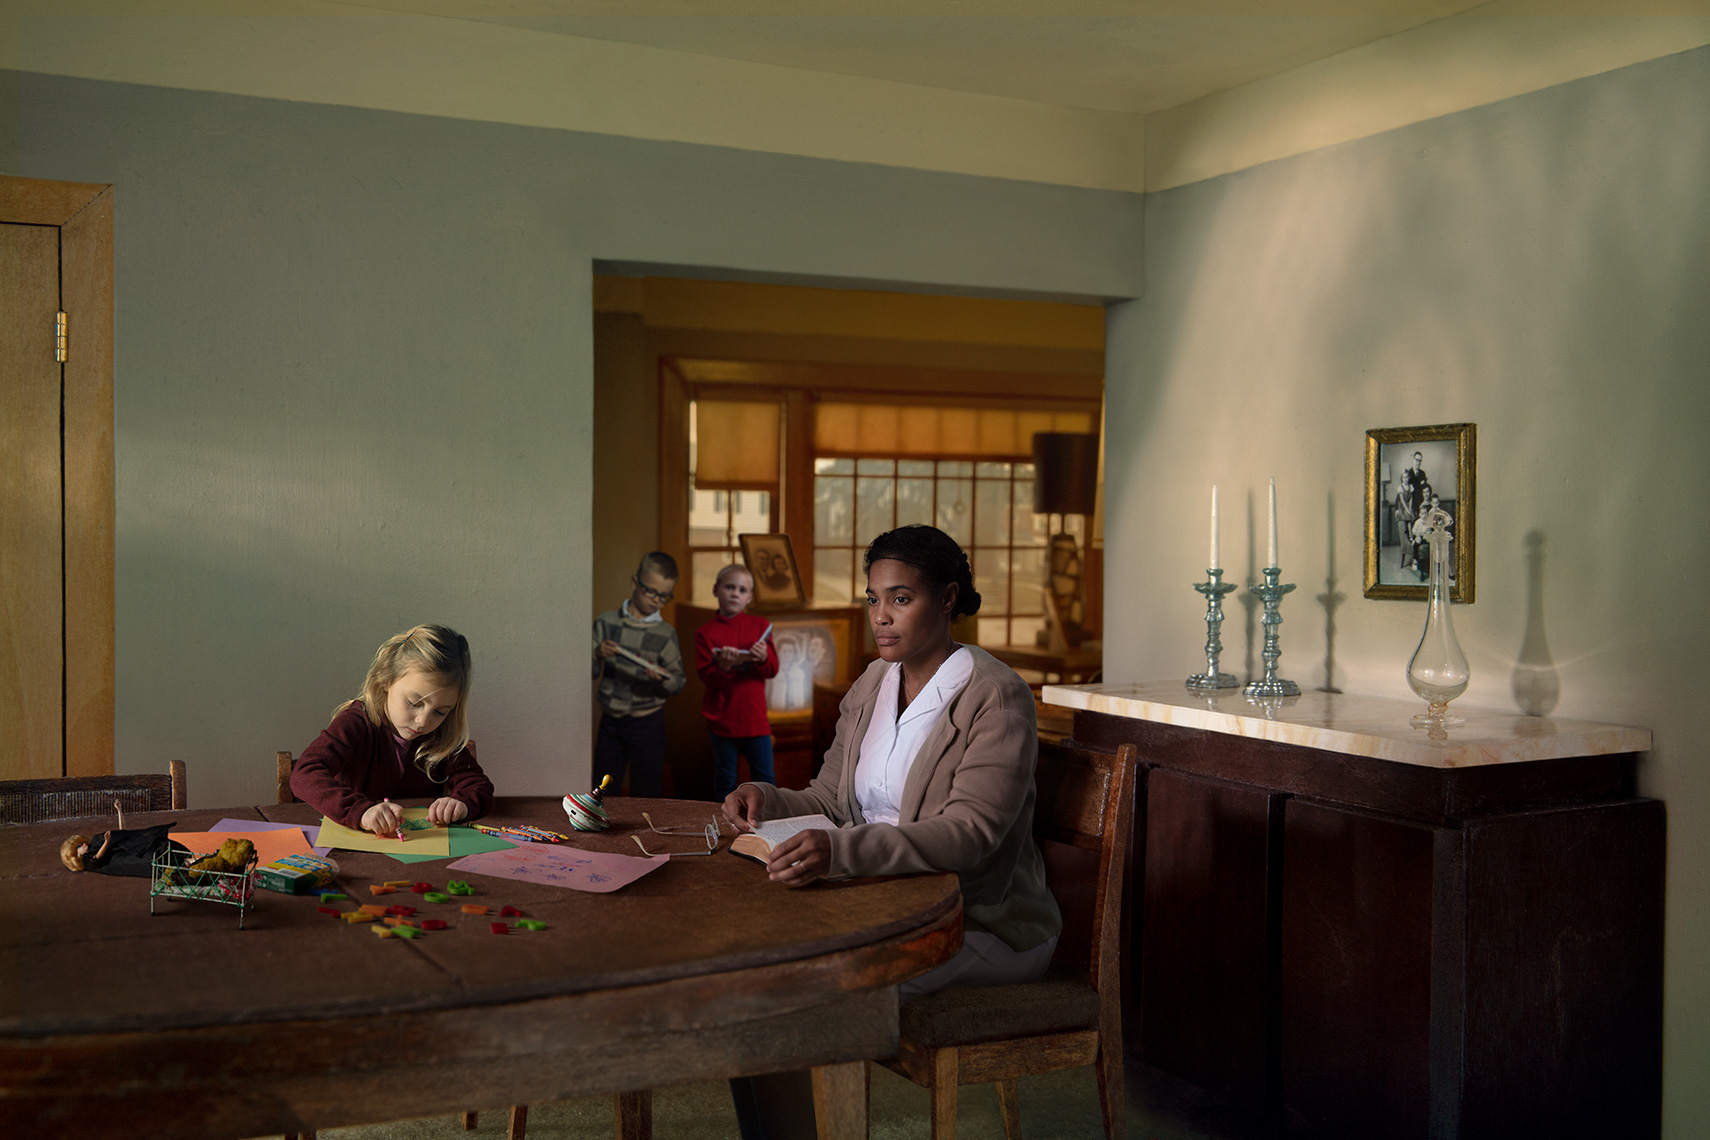 Staged photomontage of African-American nanny lost in thought as young girl draws and boys play in front of TV in 1960s’ suburban interior re-creation.